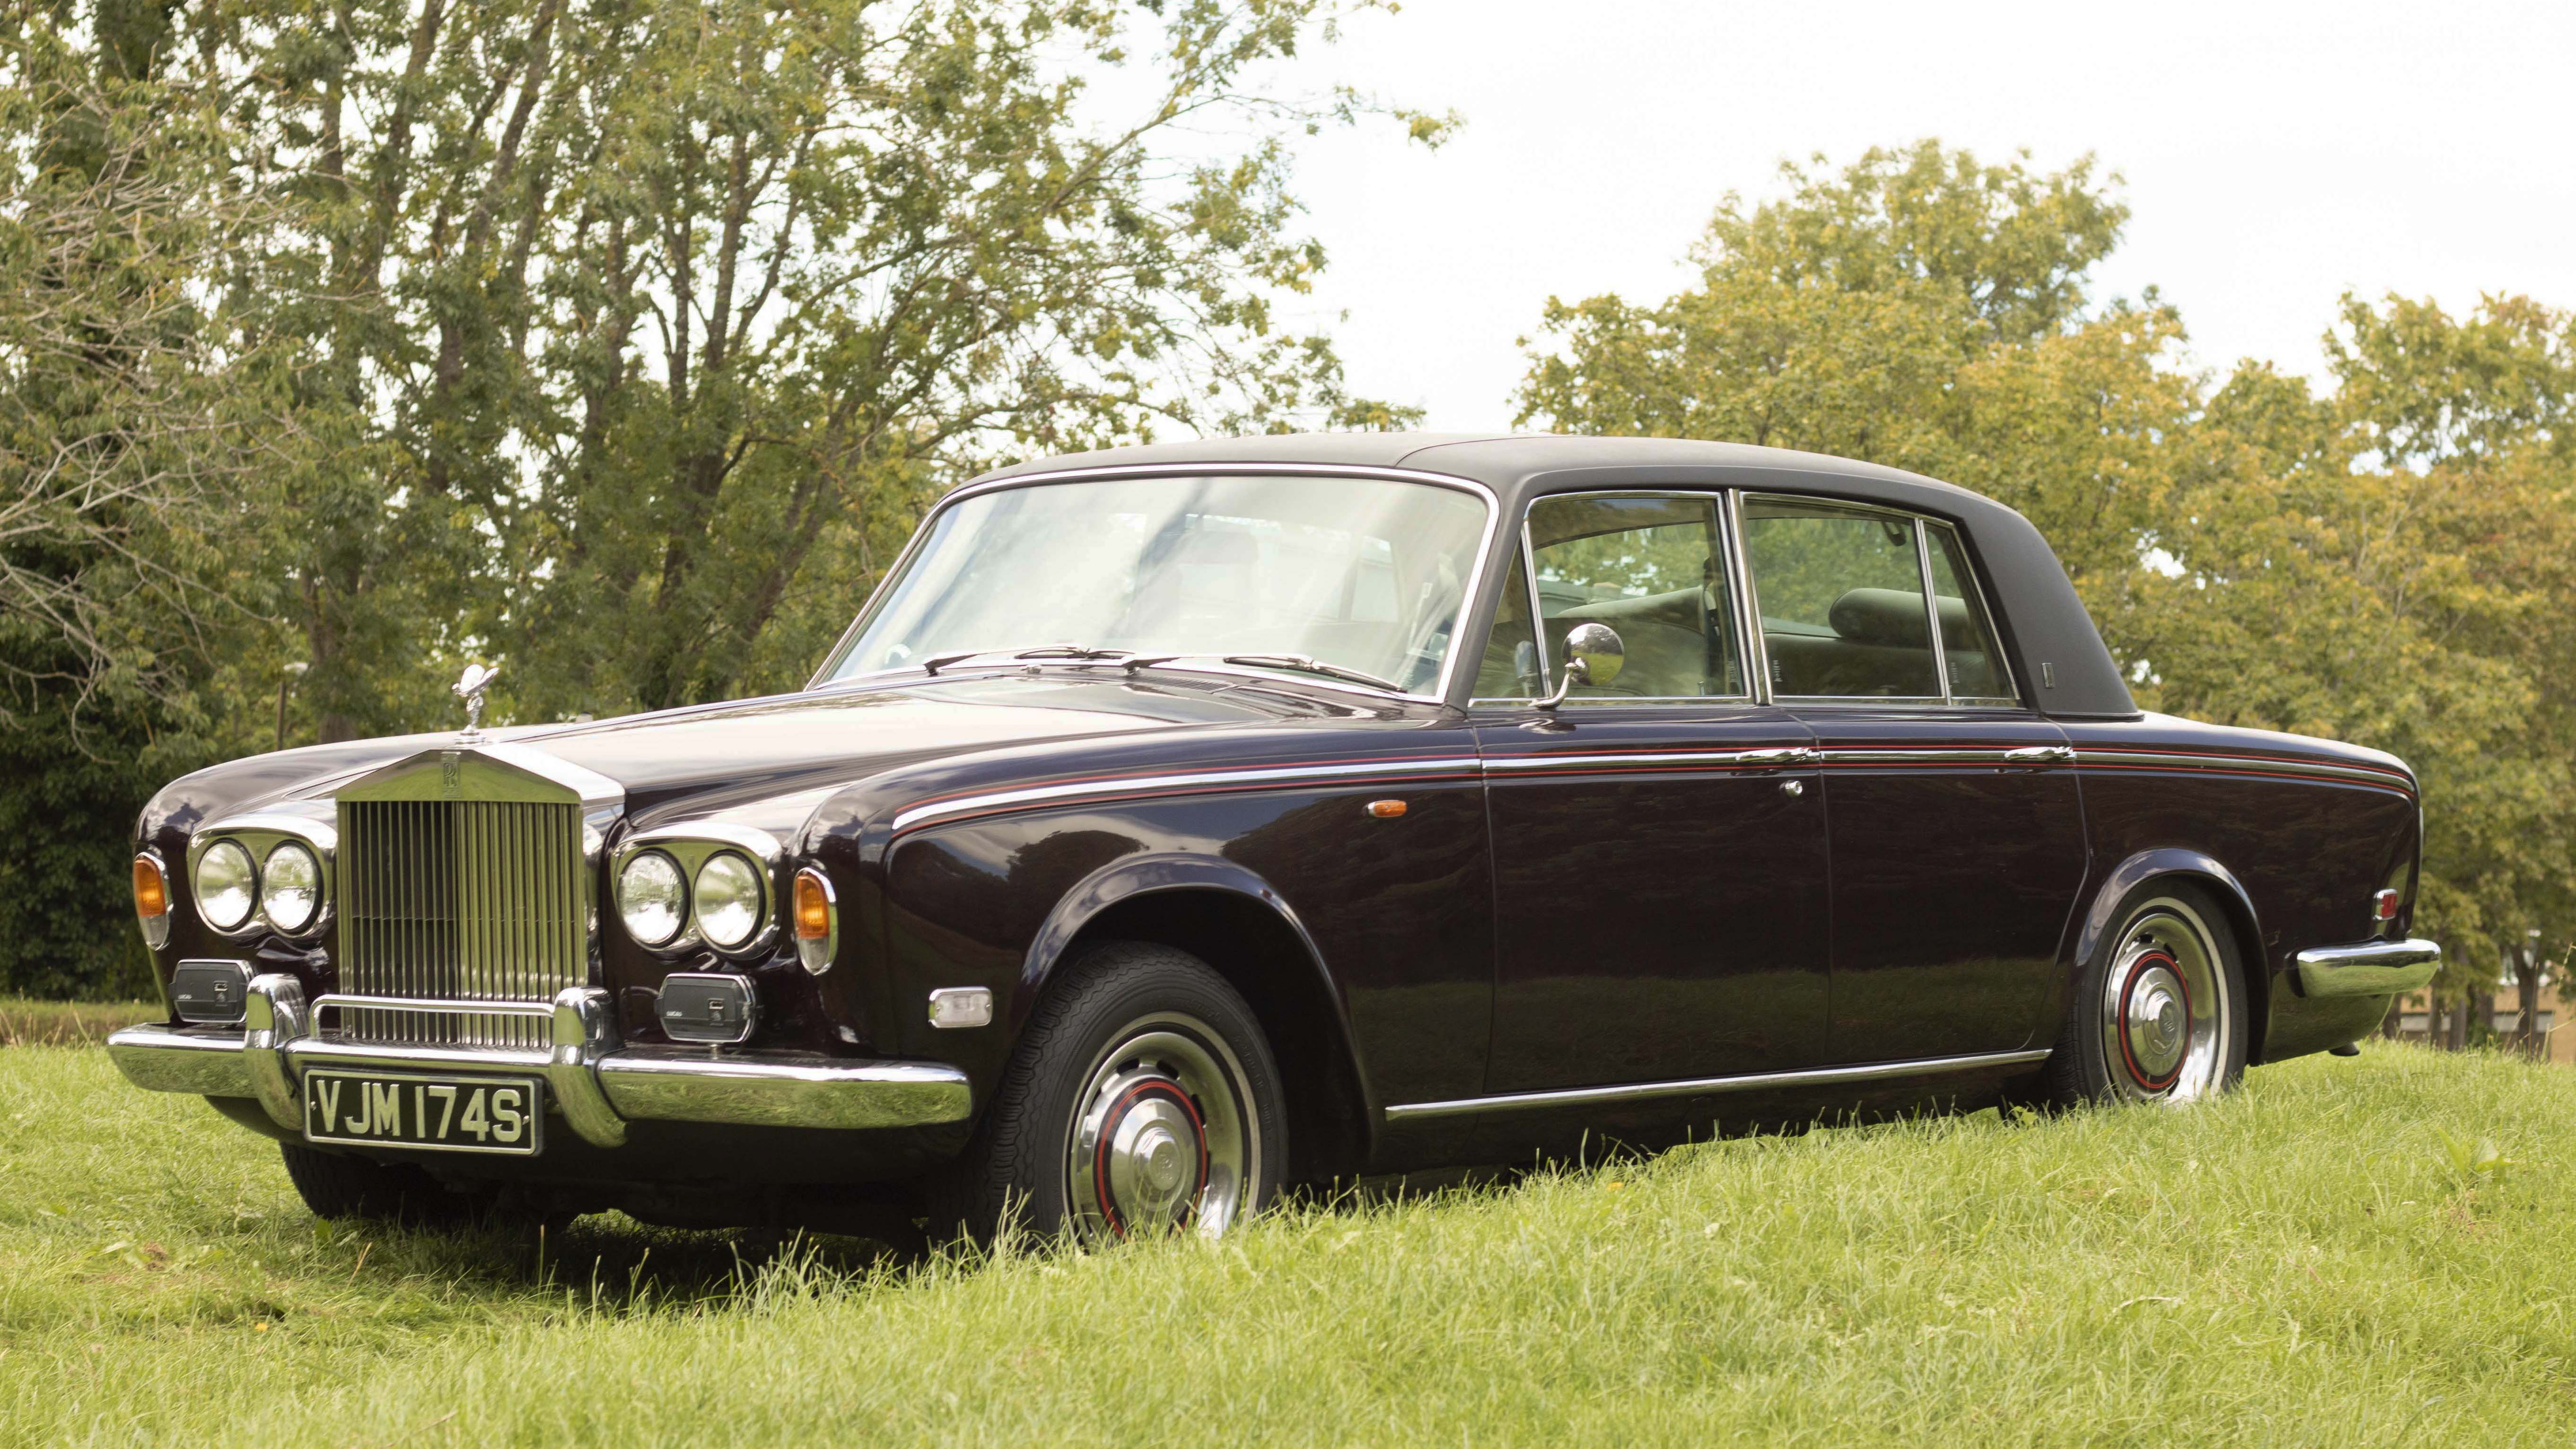 Side View of a classic Rolls-Royce silver Shadow Mk1 with Chrome Bumpers in a green field